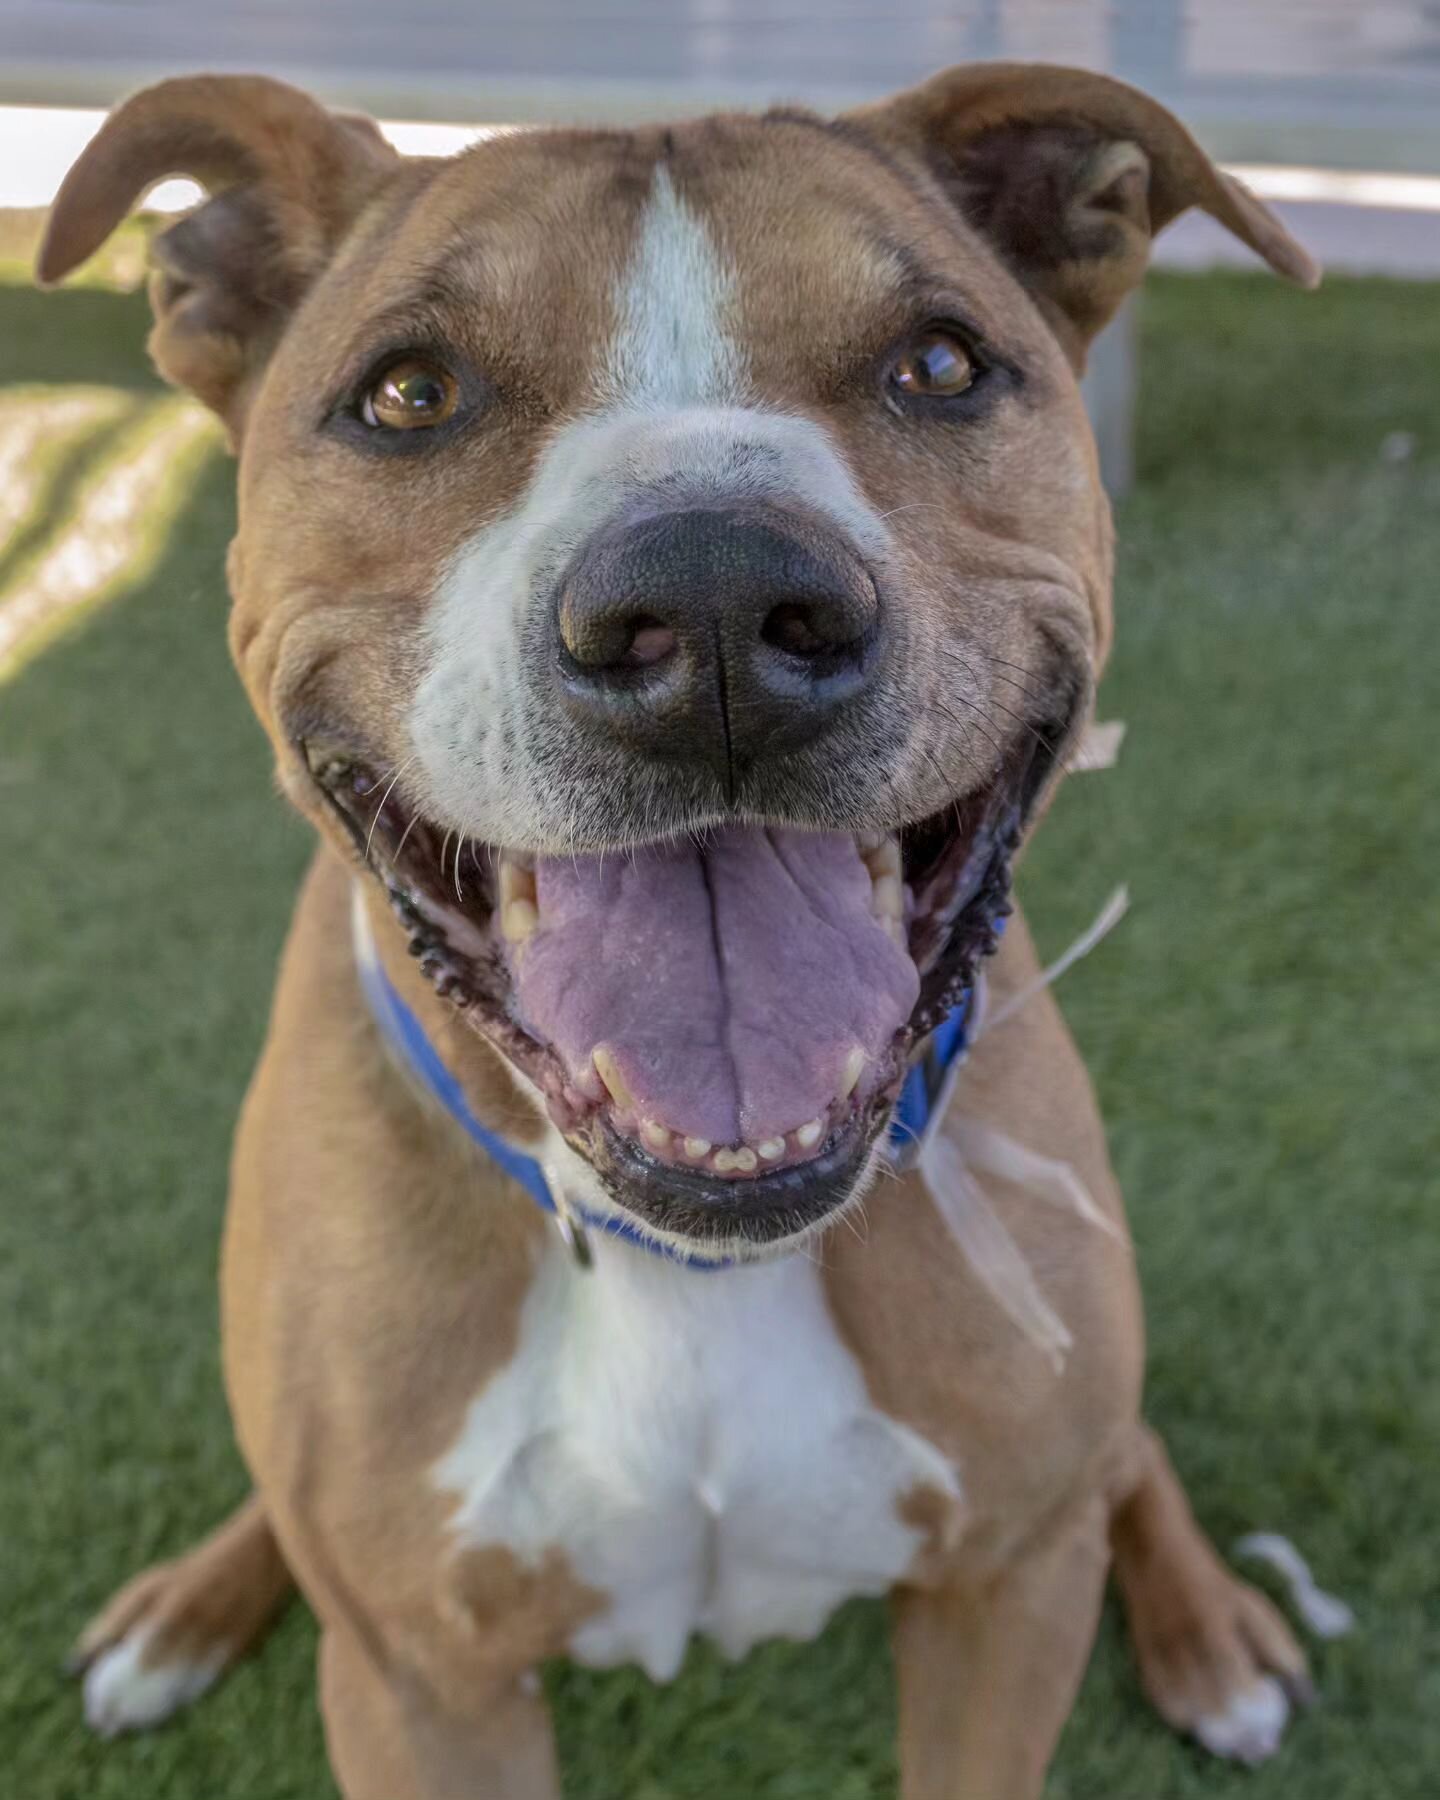 Ok guys, we really need your help in finding Dallas (#A4702168) his perfect forever home! Dallas ended up at the shelter after his owner died. 💔 He was found by his owners side. 😞 Poor Dallas has lost so much &amp; he deserves the world. He is a lo